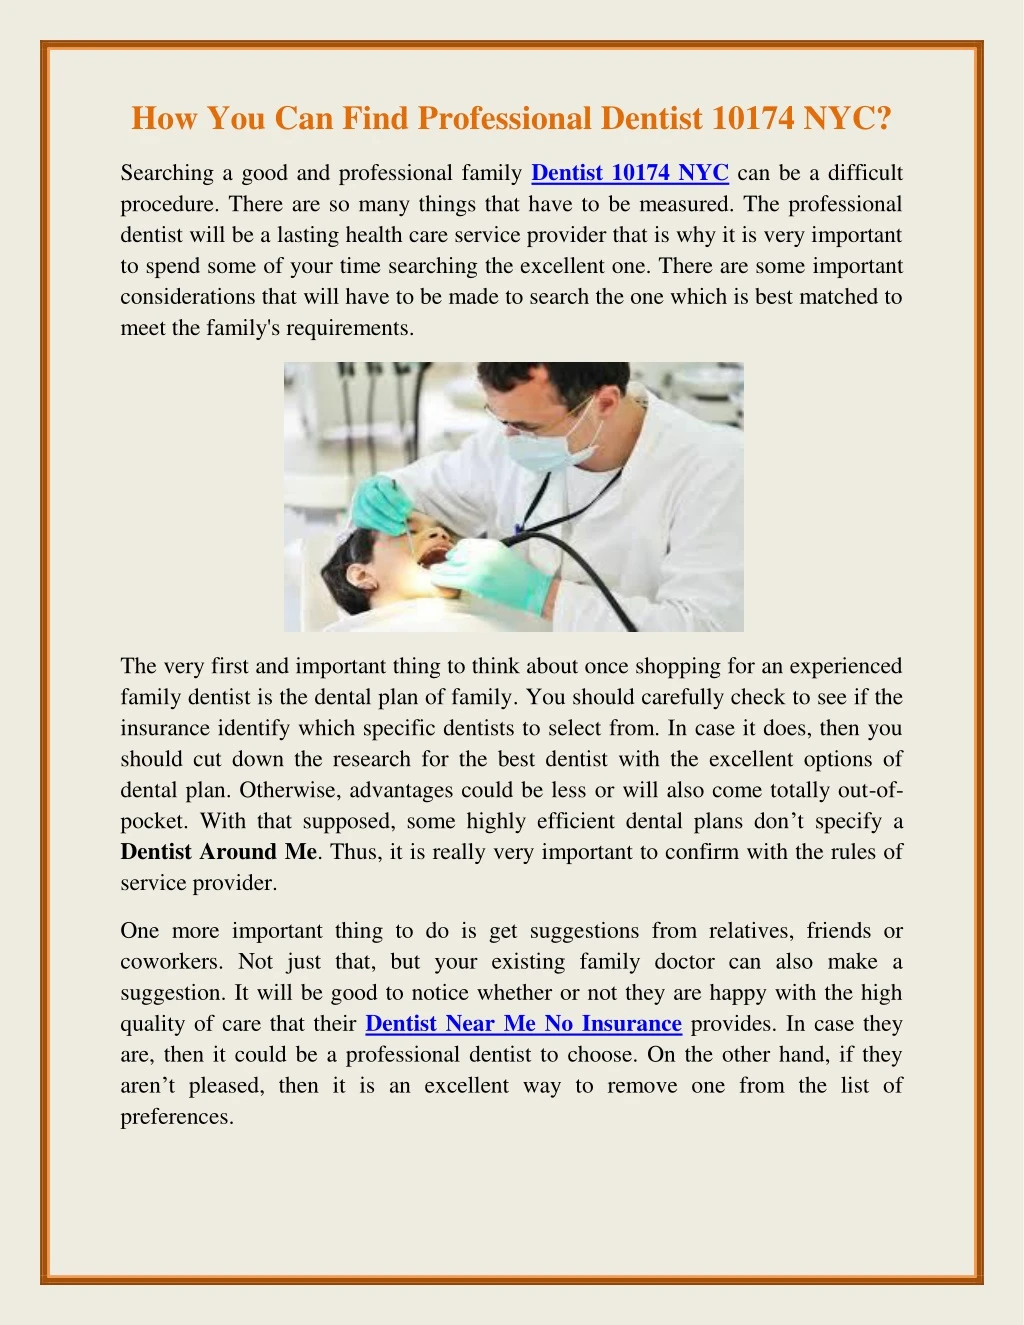 how you can find professional dentist 10174 nyc